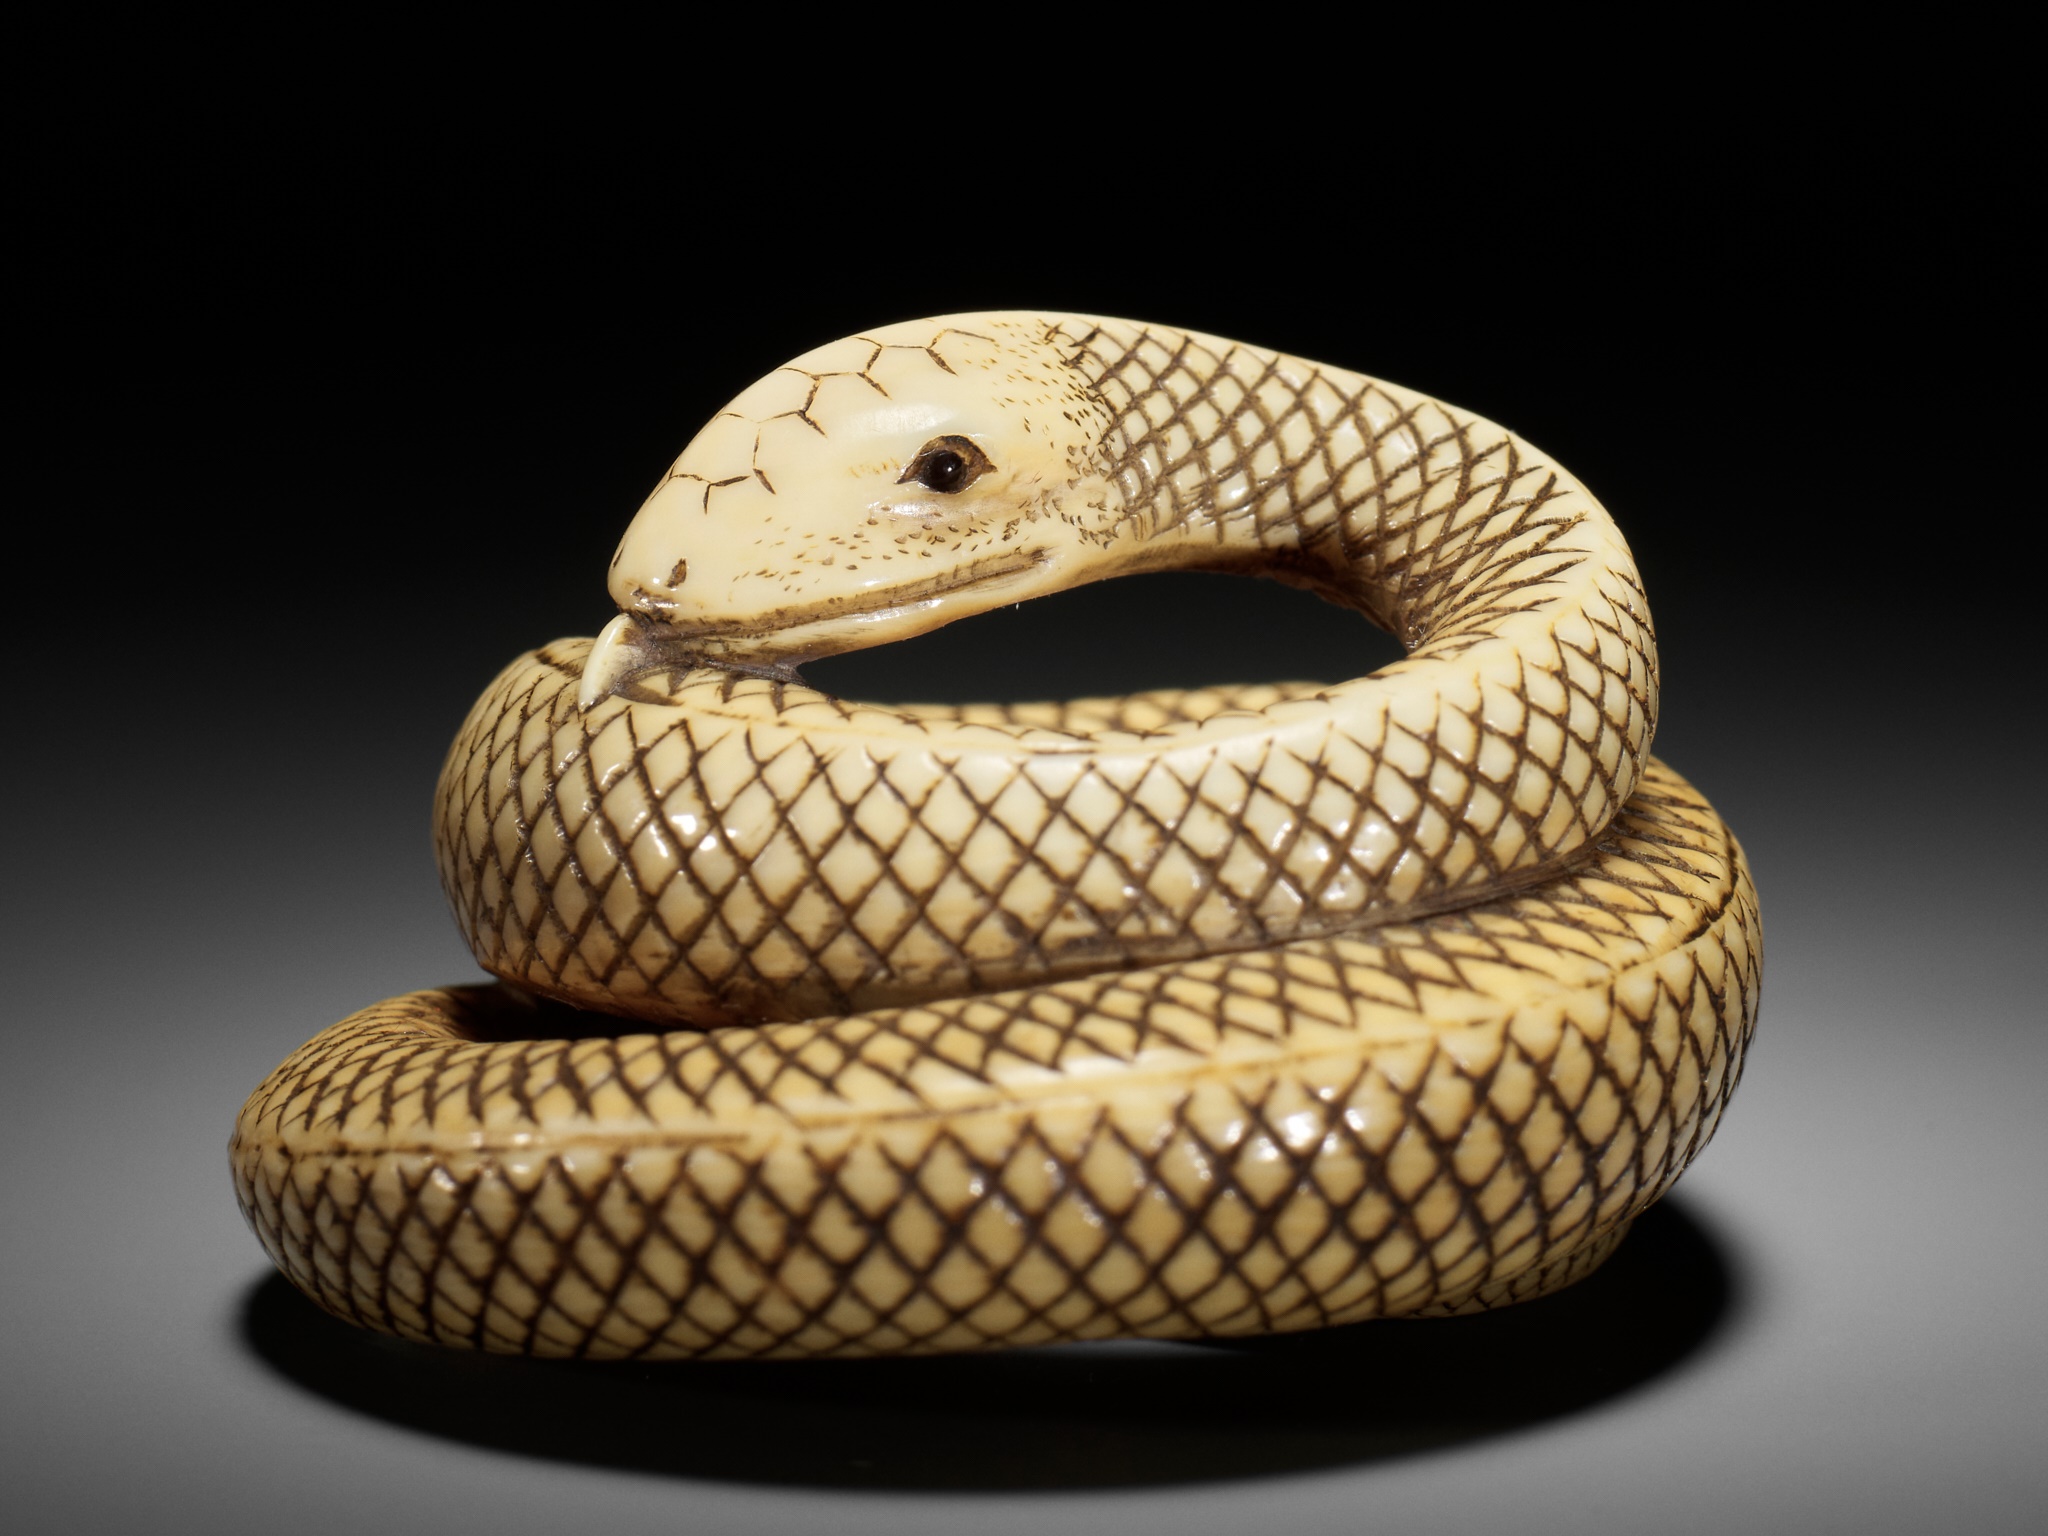 AN IVORY NETSUKE OF A COILED SNAKE, ATTRIBUTED TO OKATOMO - Image 14 of 16